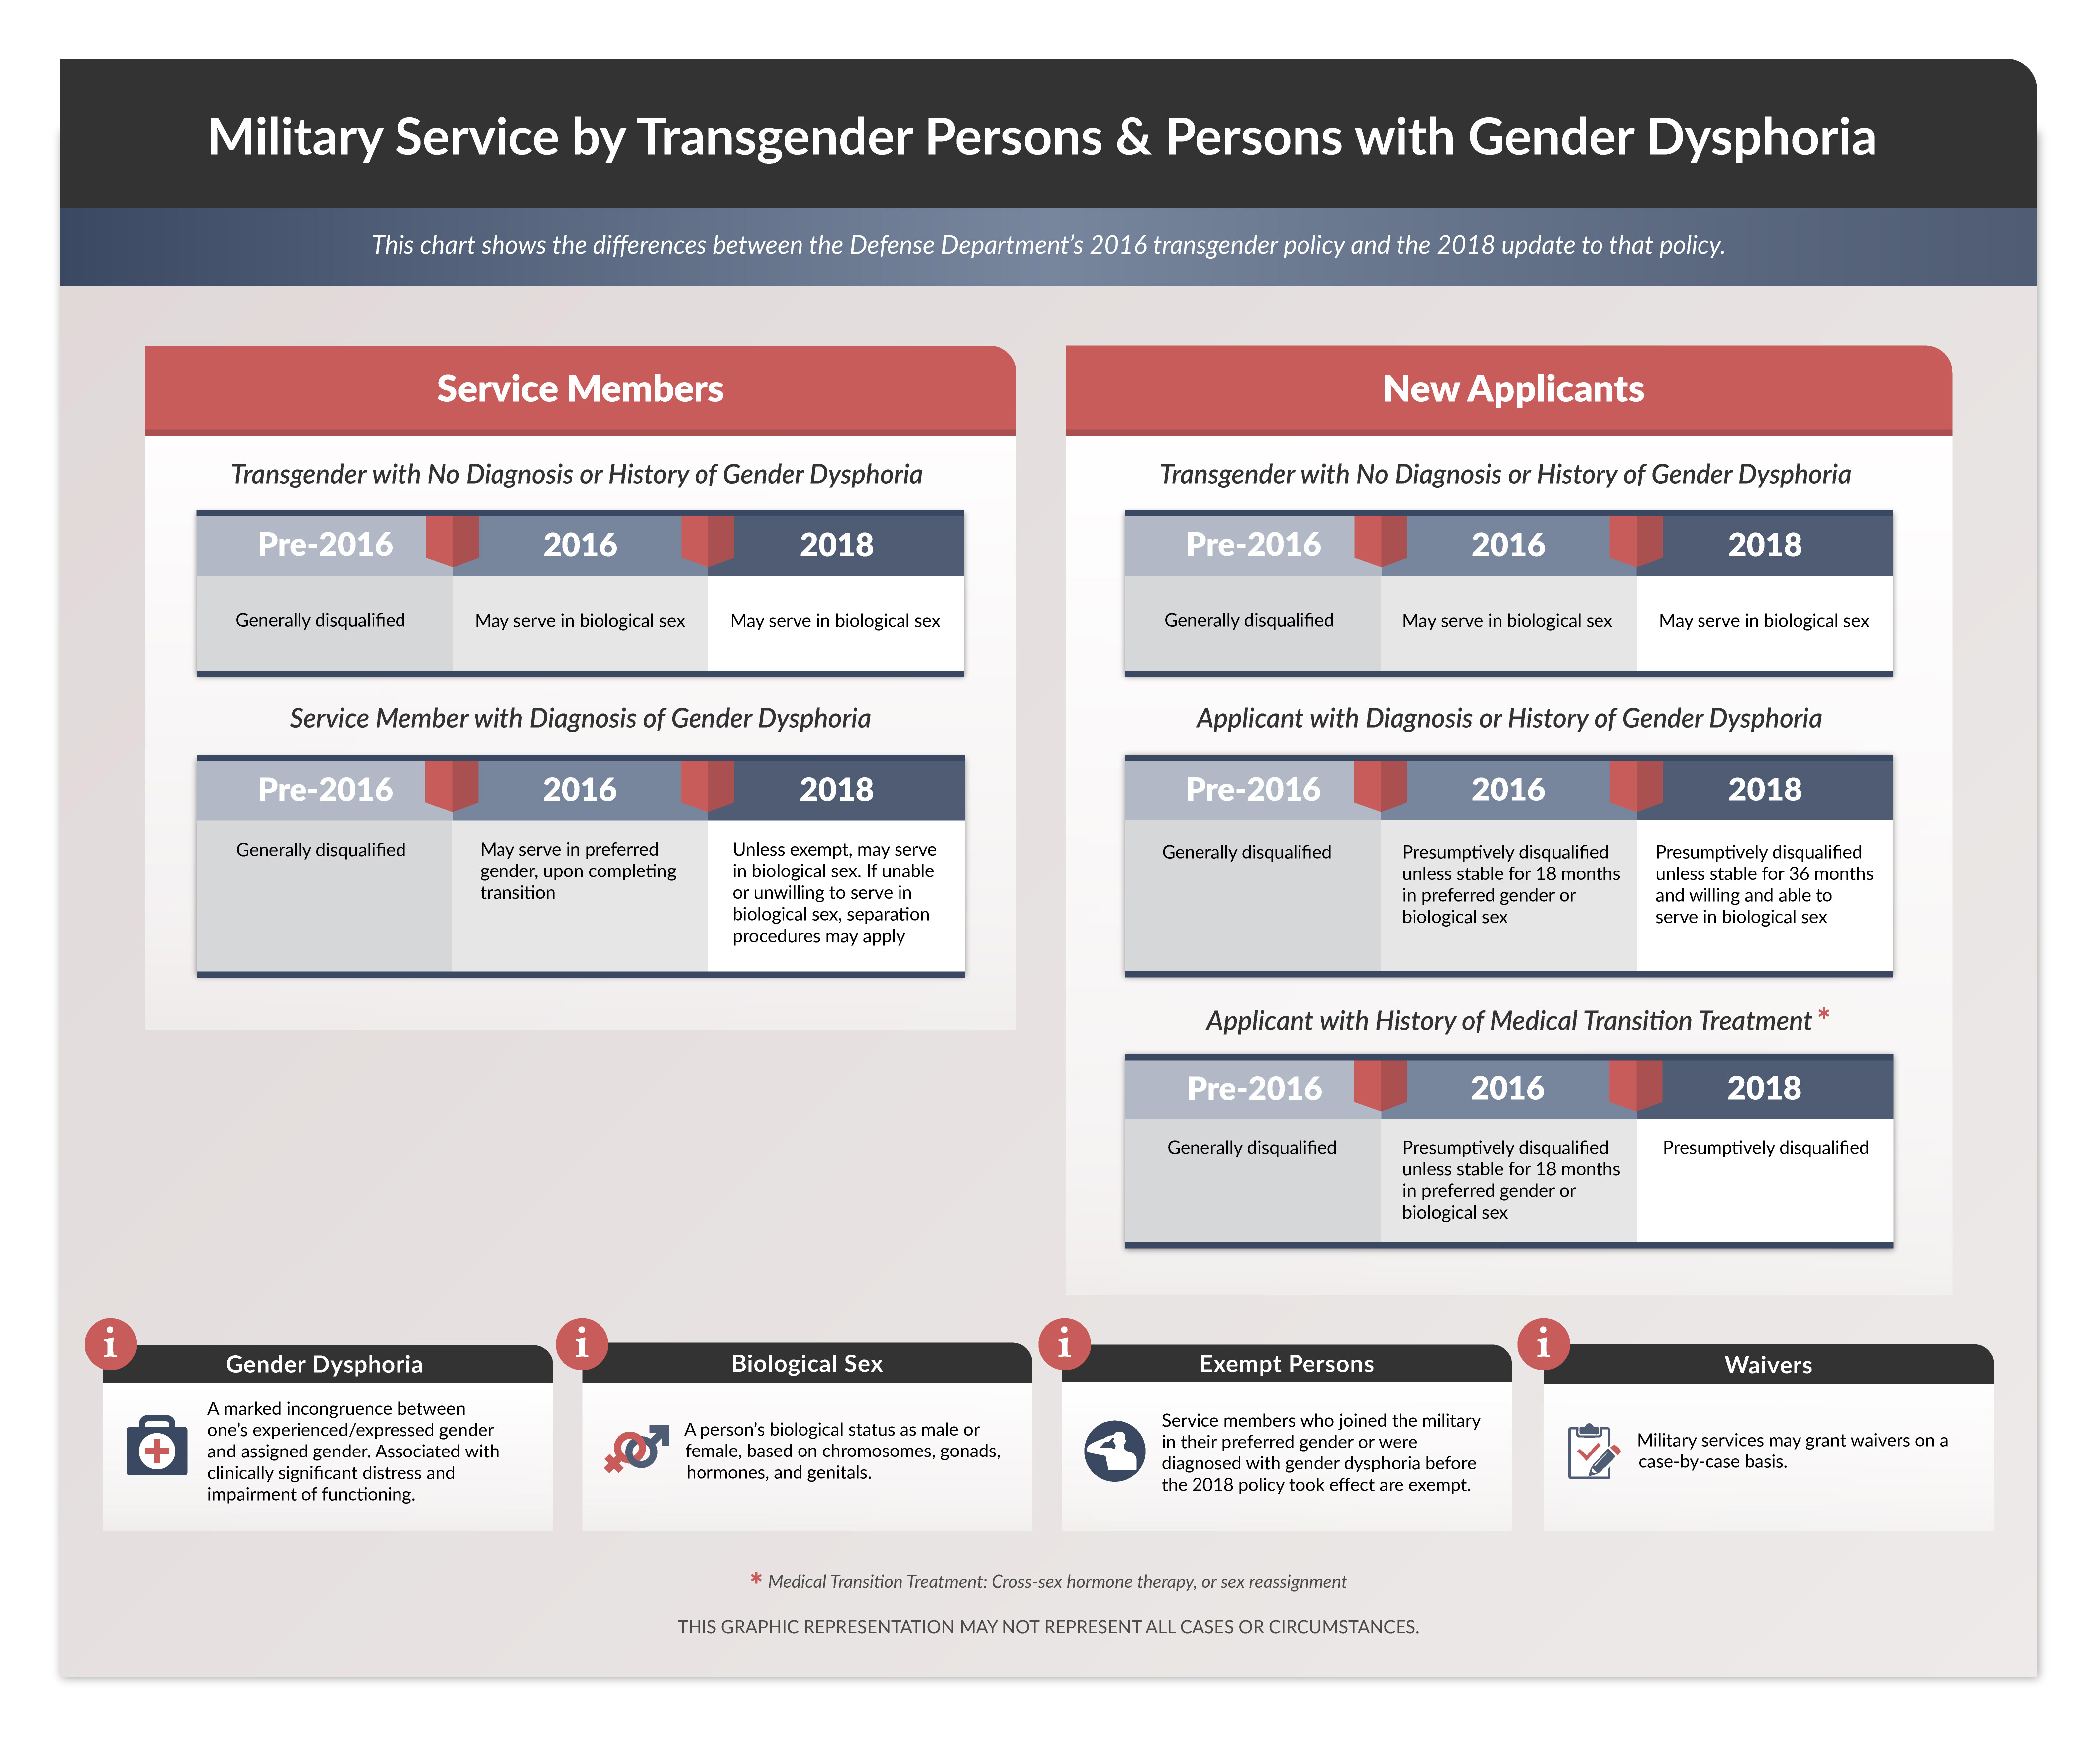 5 Things to Know About DODs New Policy on Military Service by Transgender Persons and Persons With Gender Dysphoriau003e